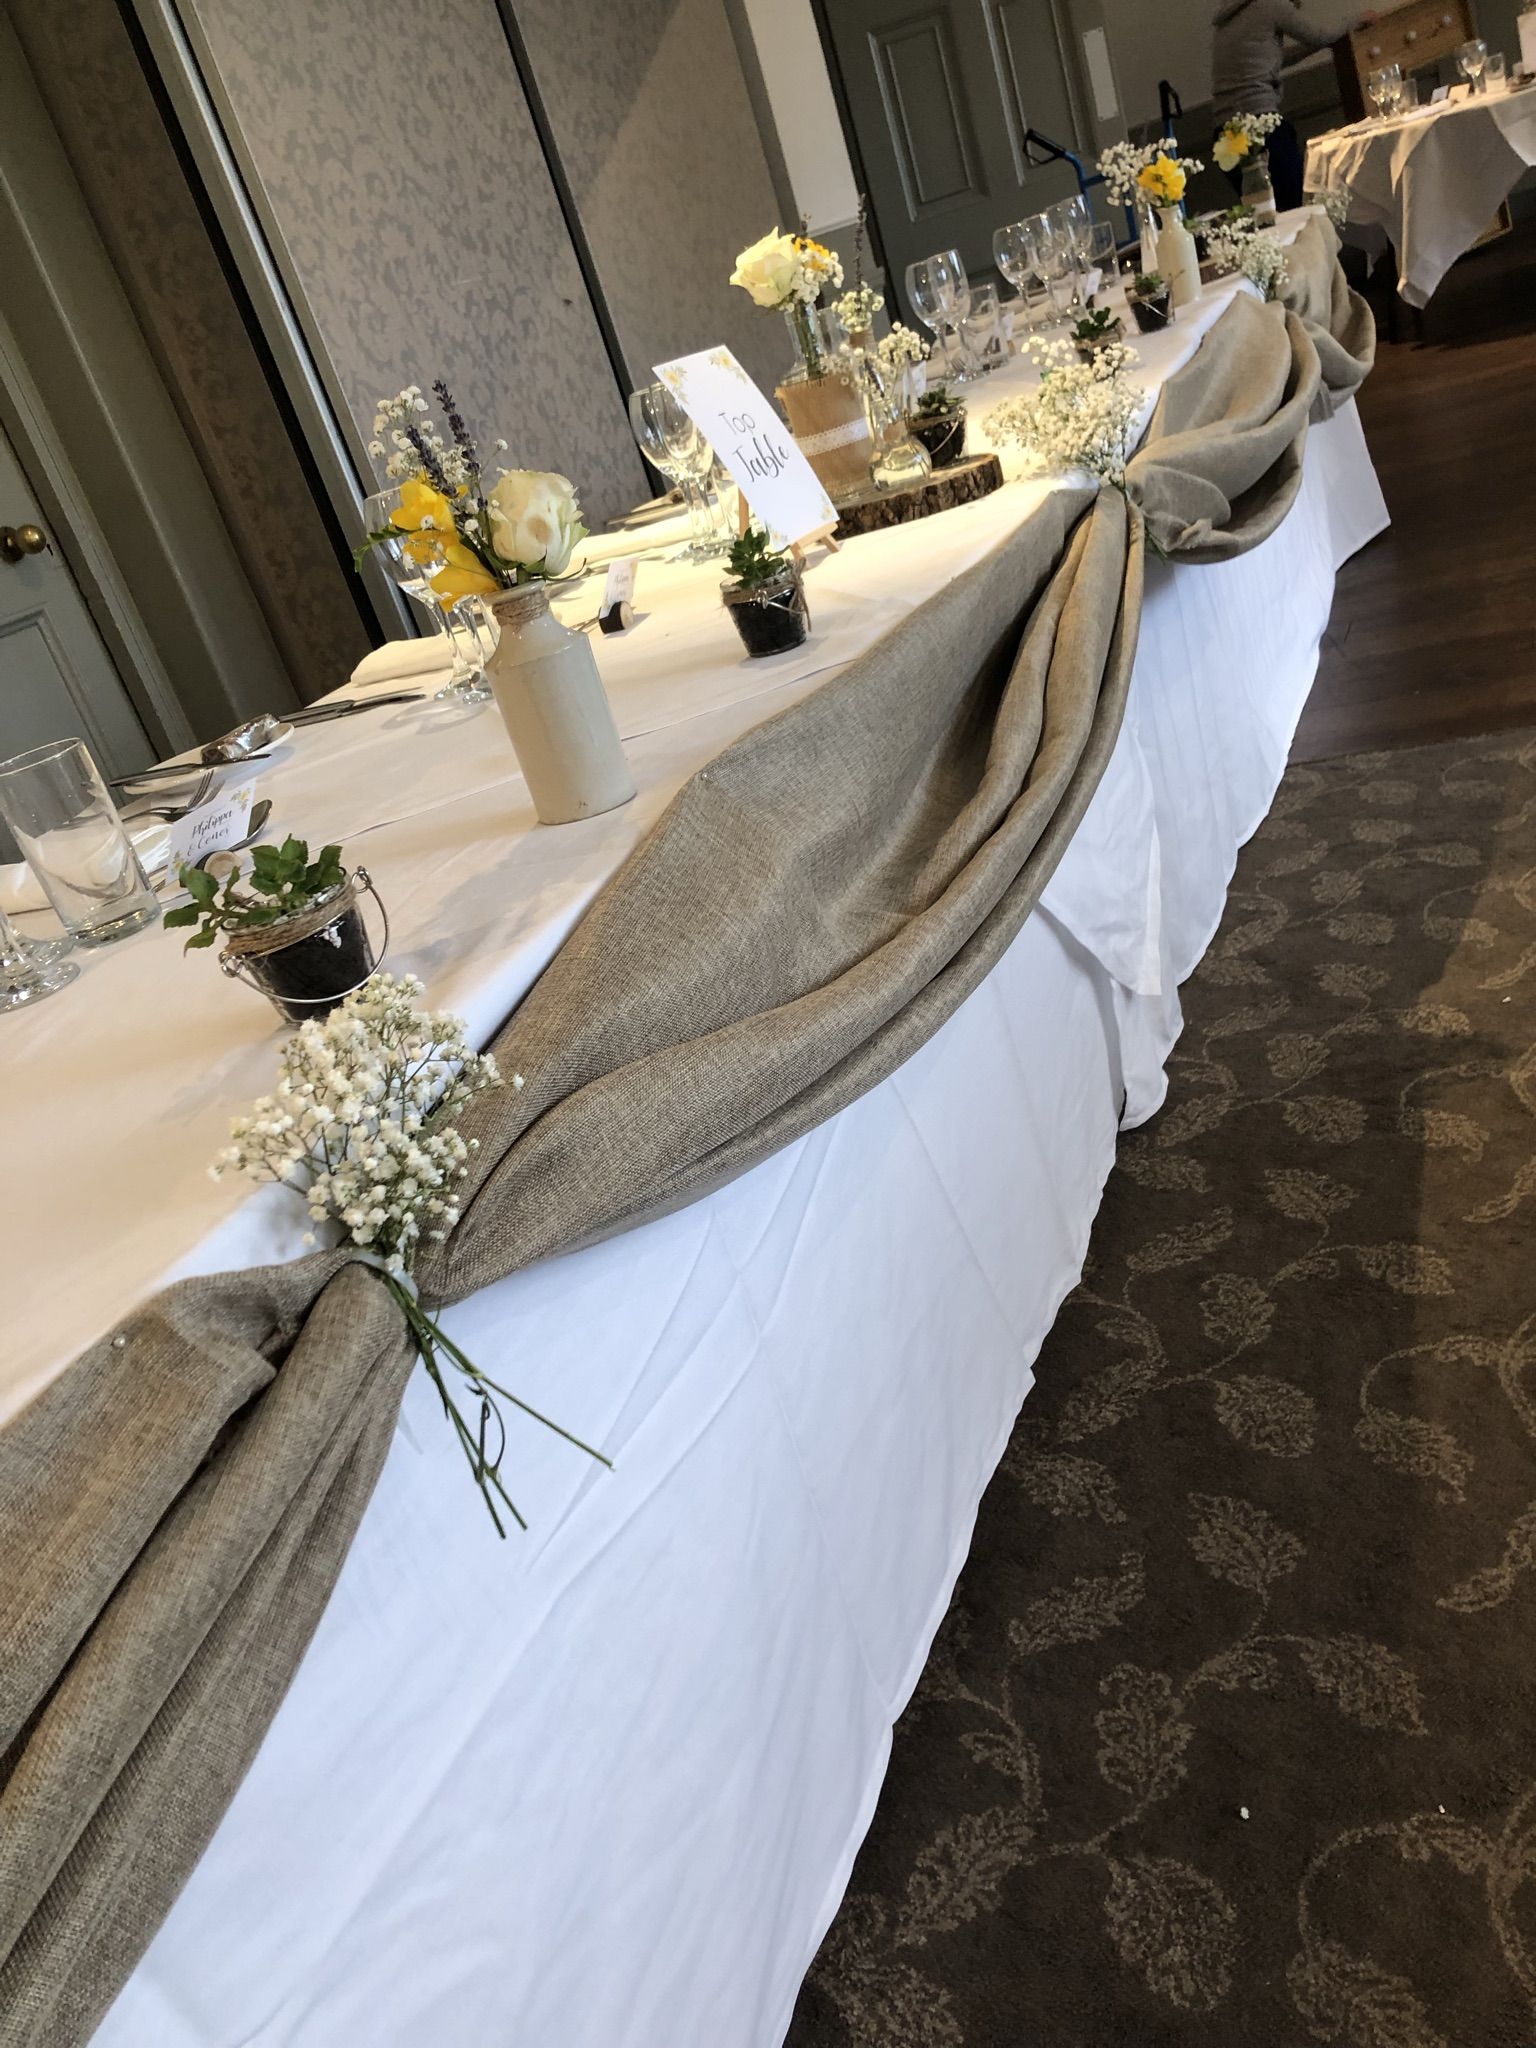 a long table with a white table cloth draped over it.